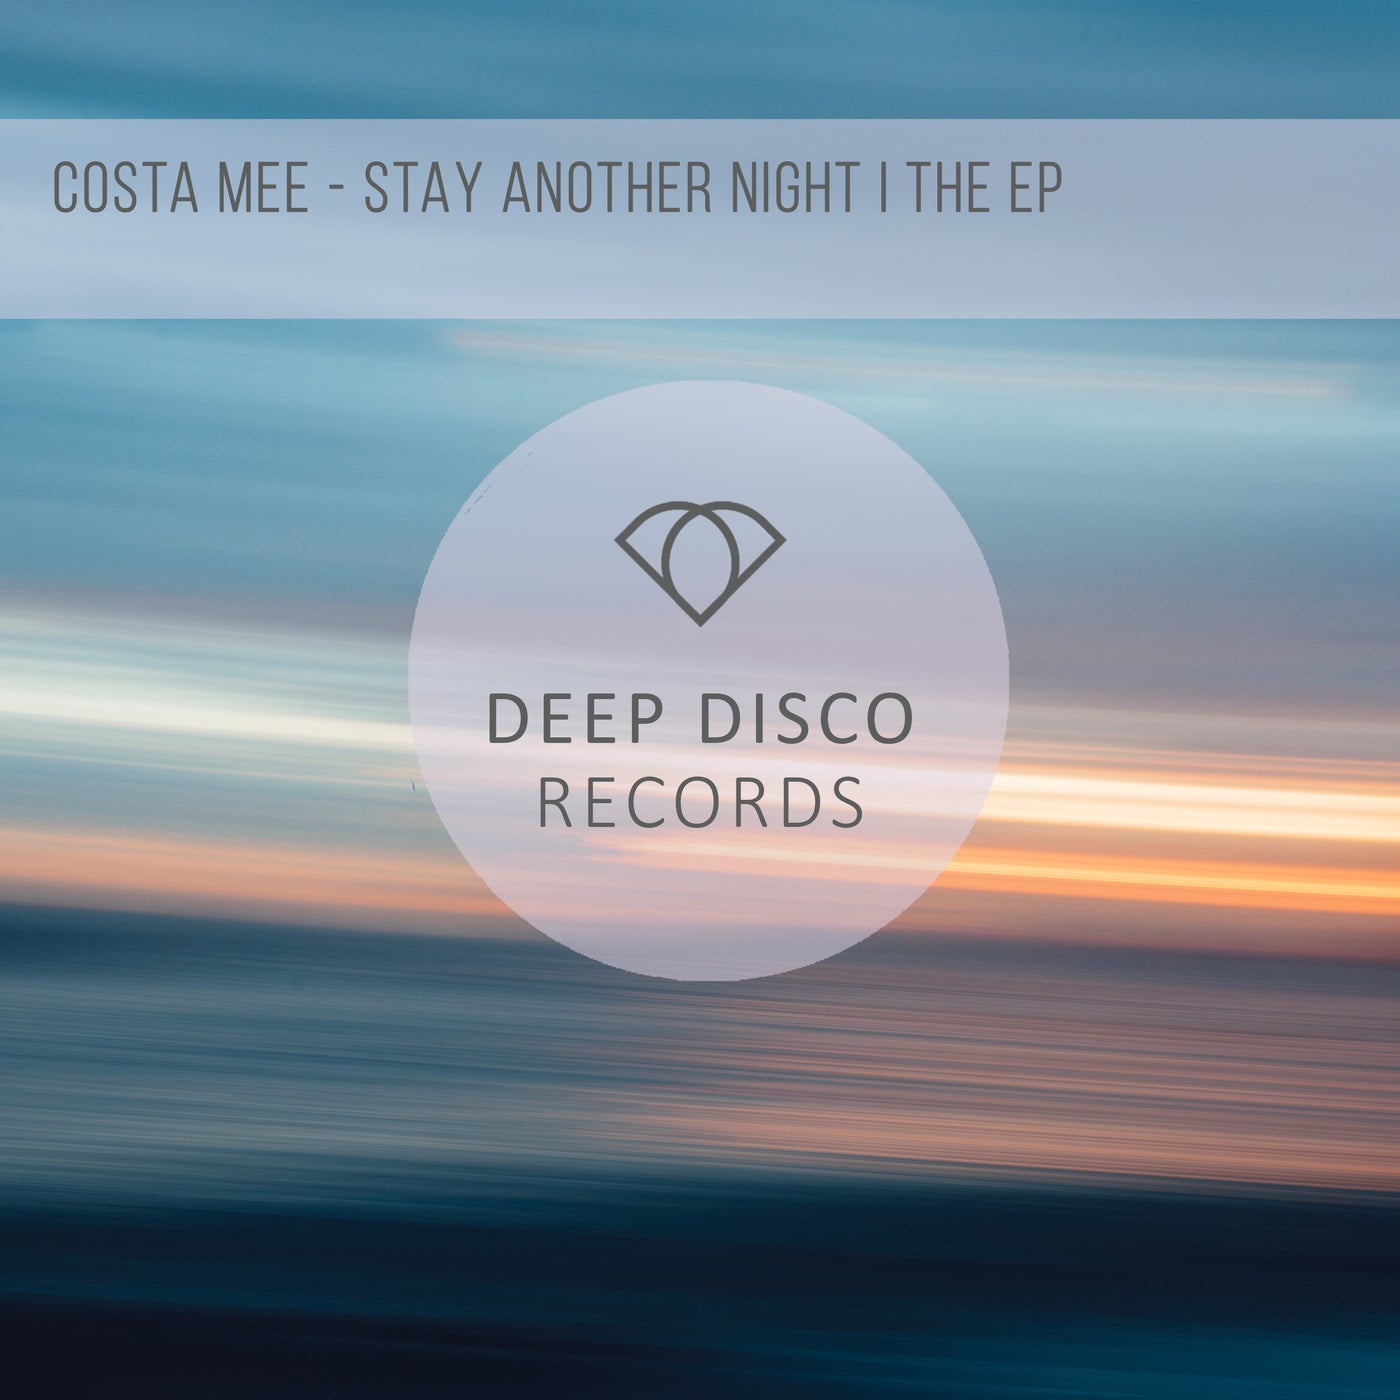 Costa mee mix. Costa mee. Costa mee - a moment with you. Costa mee - around this World. Costa mee emotions Original Mix.